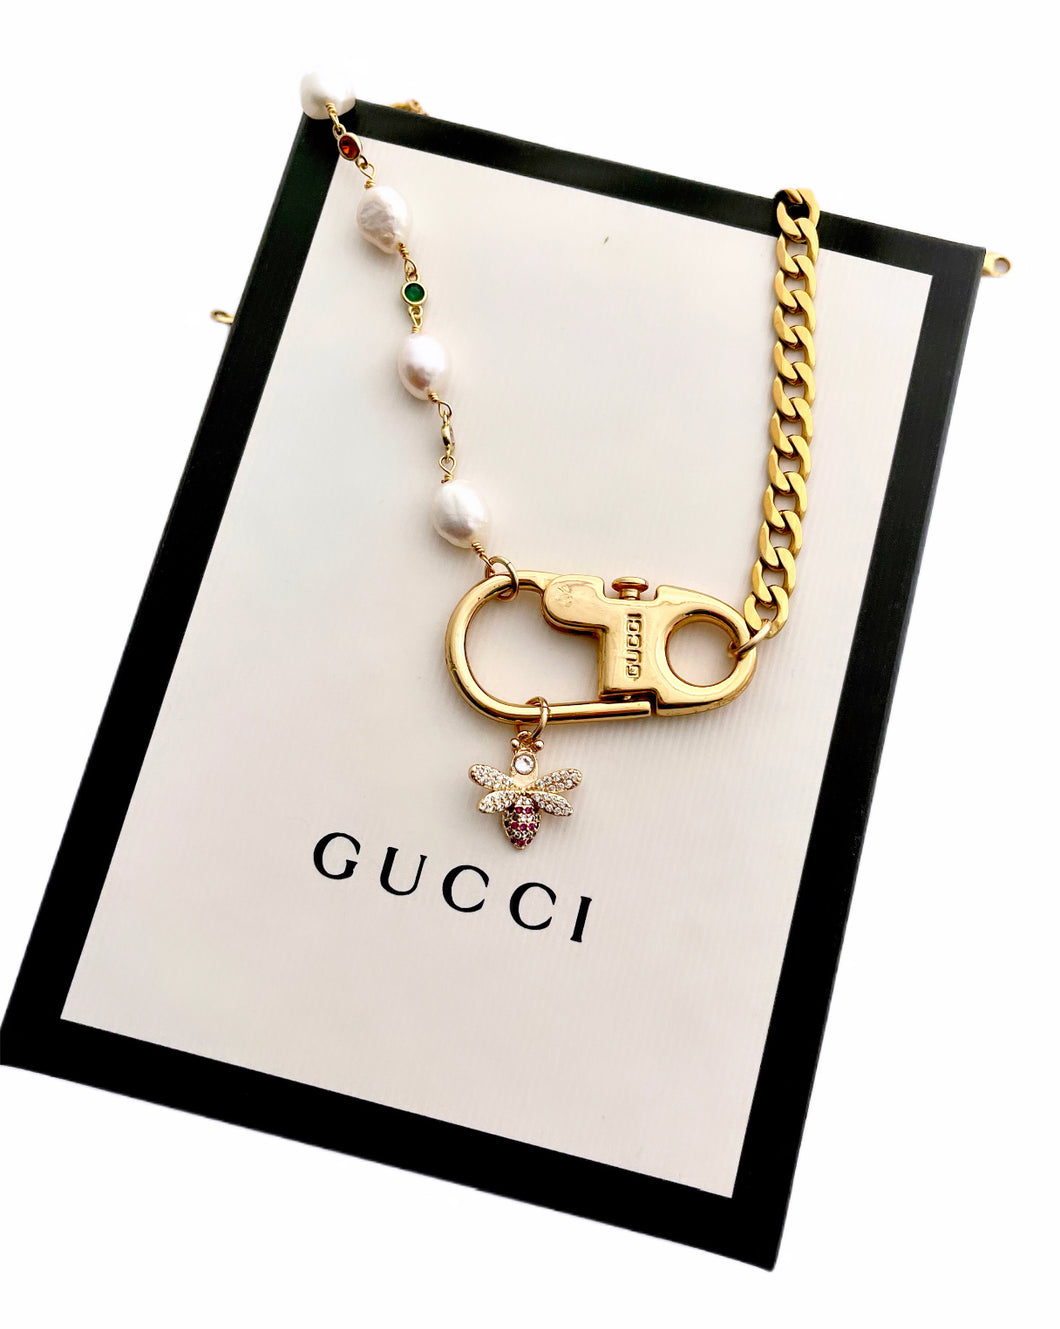 Repurposed Gucci Keychain clasp & Freshwater Pearls Necklace